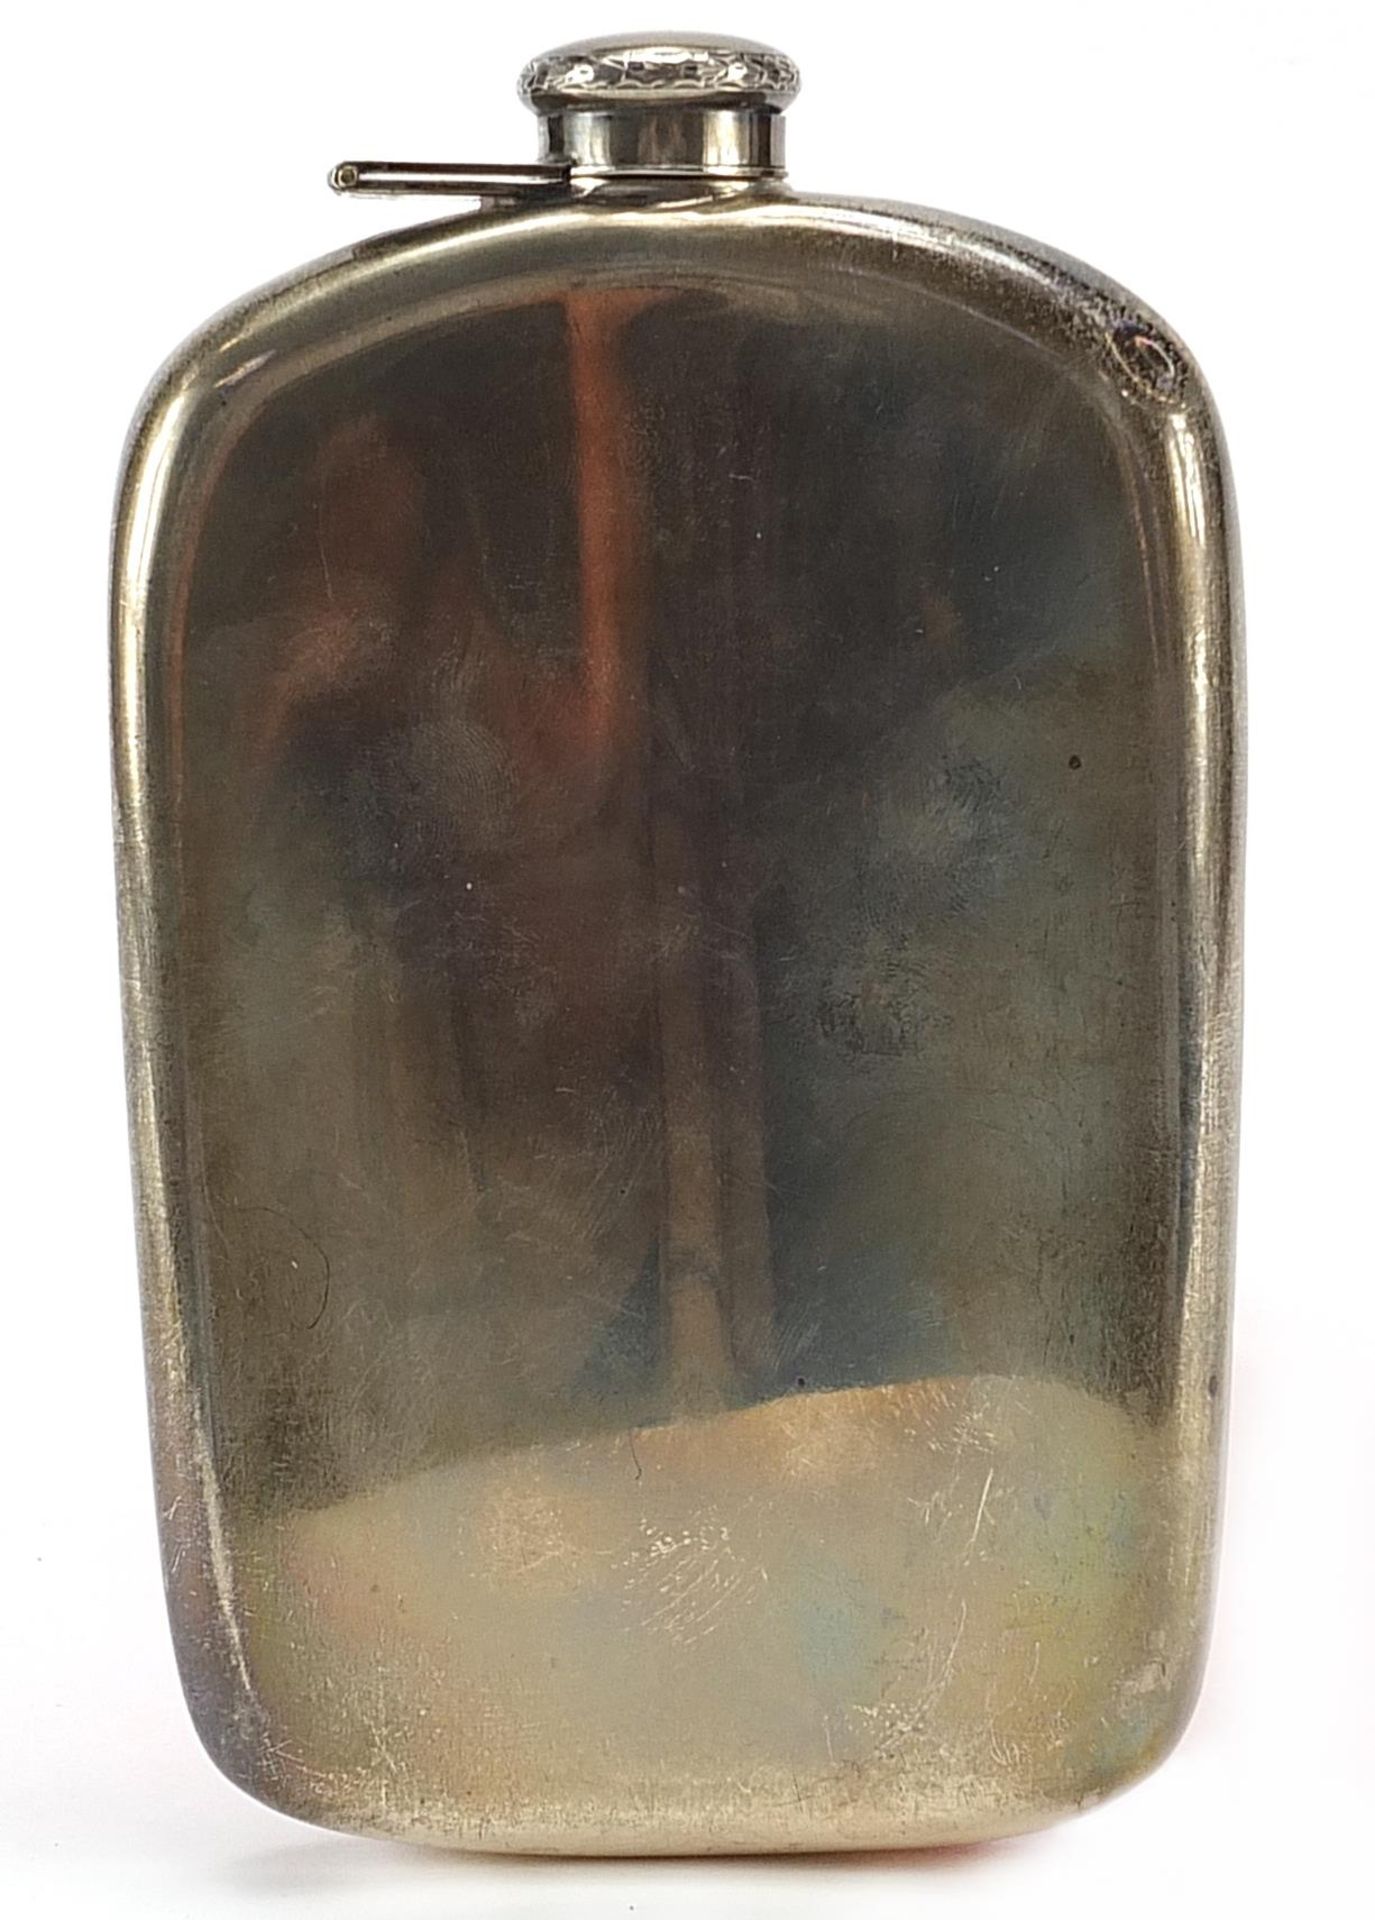 Art Deco Napier sterling silver hip flask with engine turned decoration, 16cm high, 173.5g - Image 2 of 4